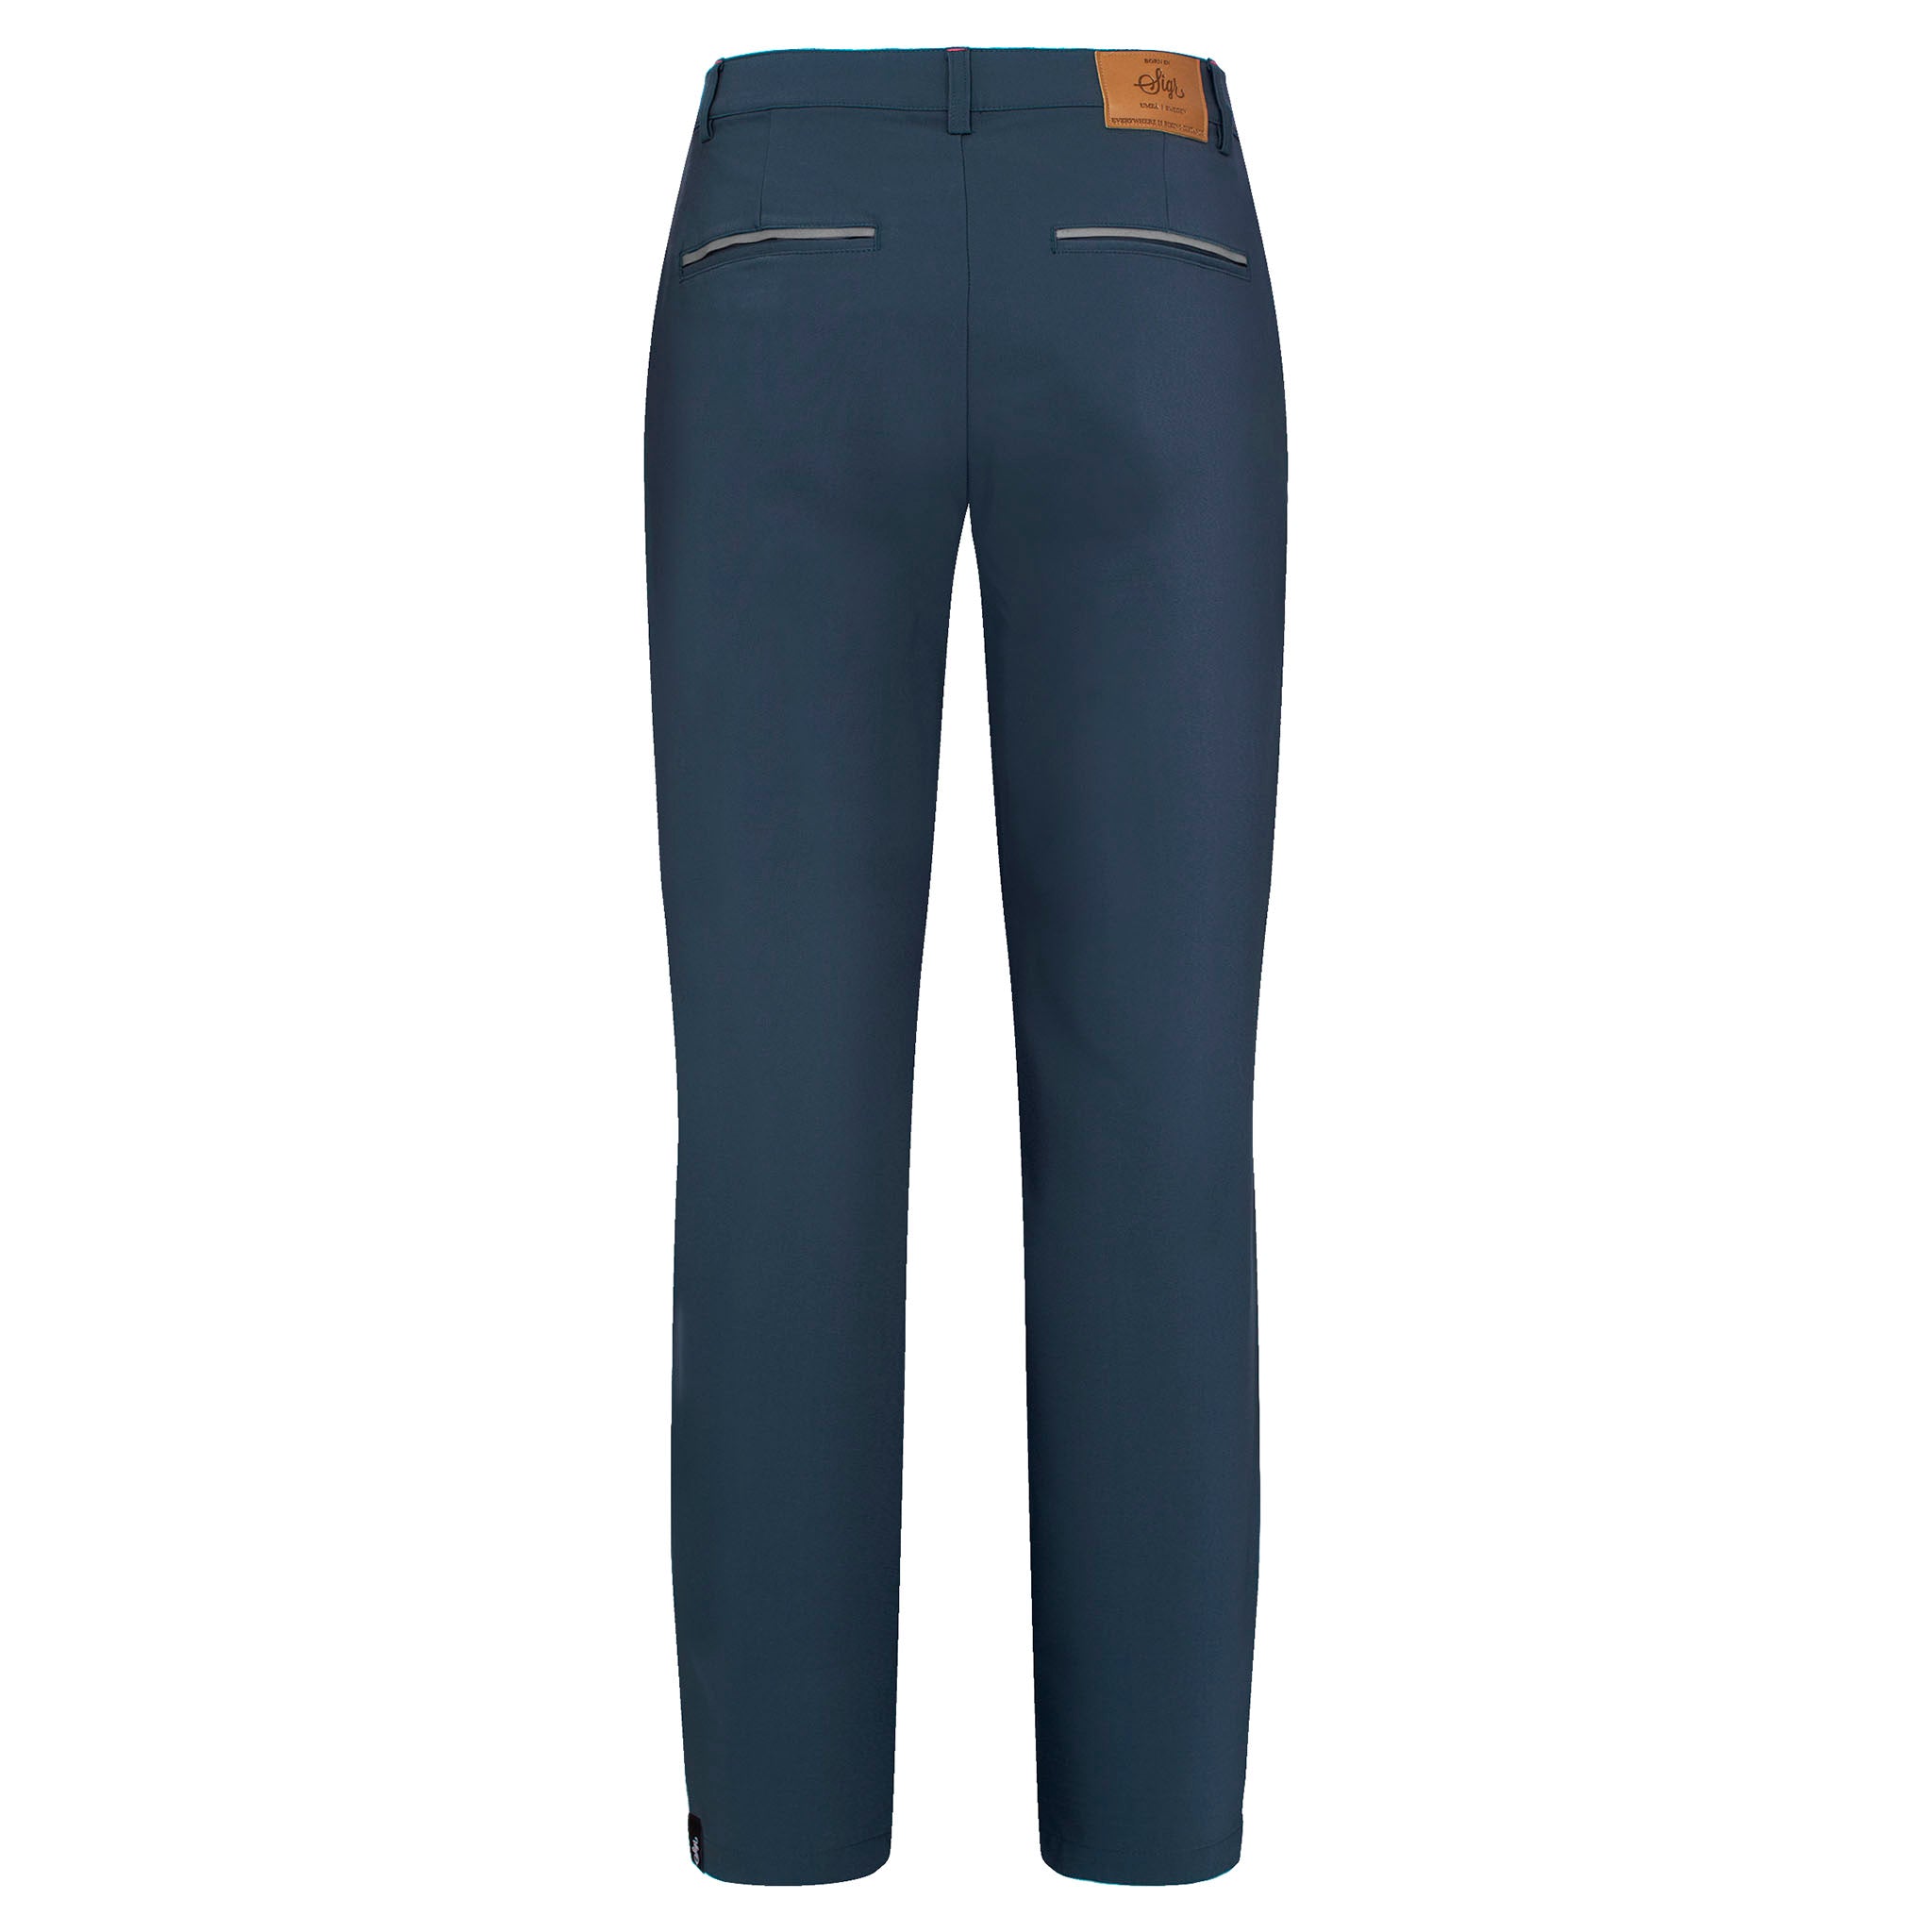 Riksvag 99 - Road Cycling Chinos in Petrol Blue for Women